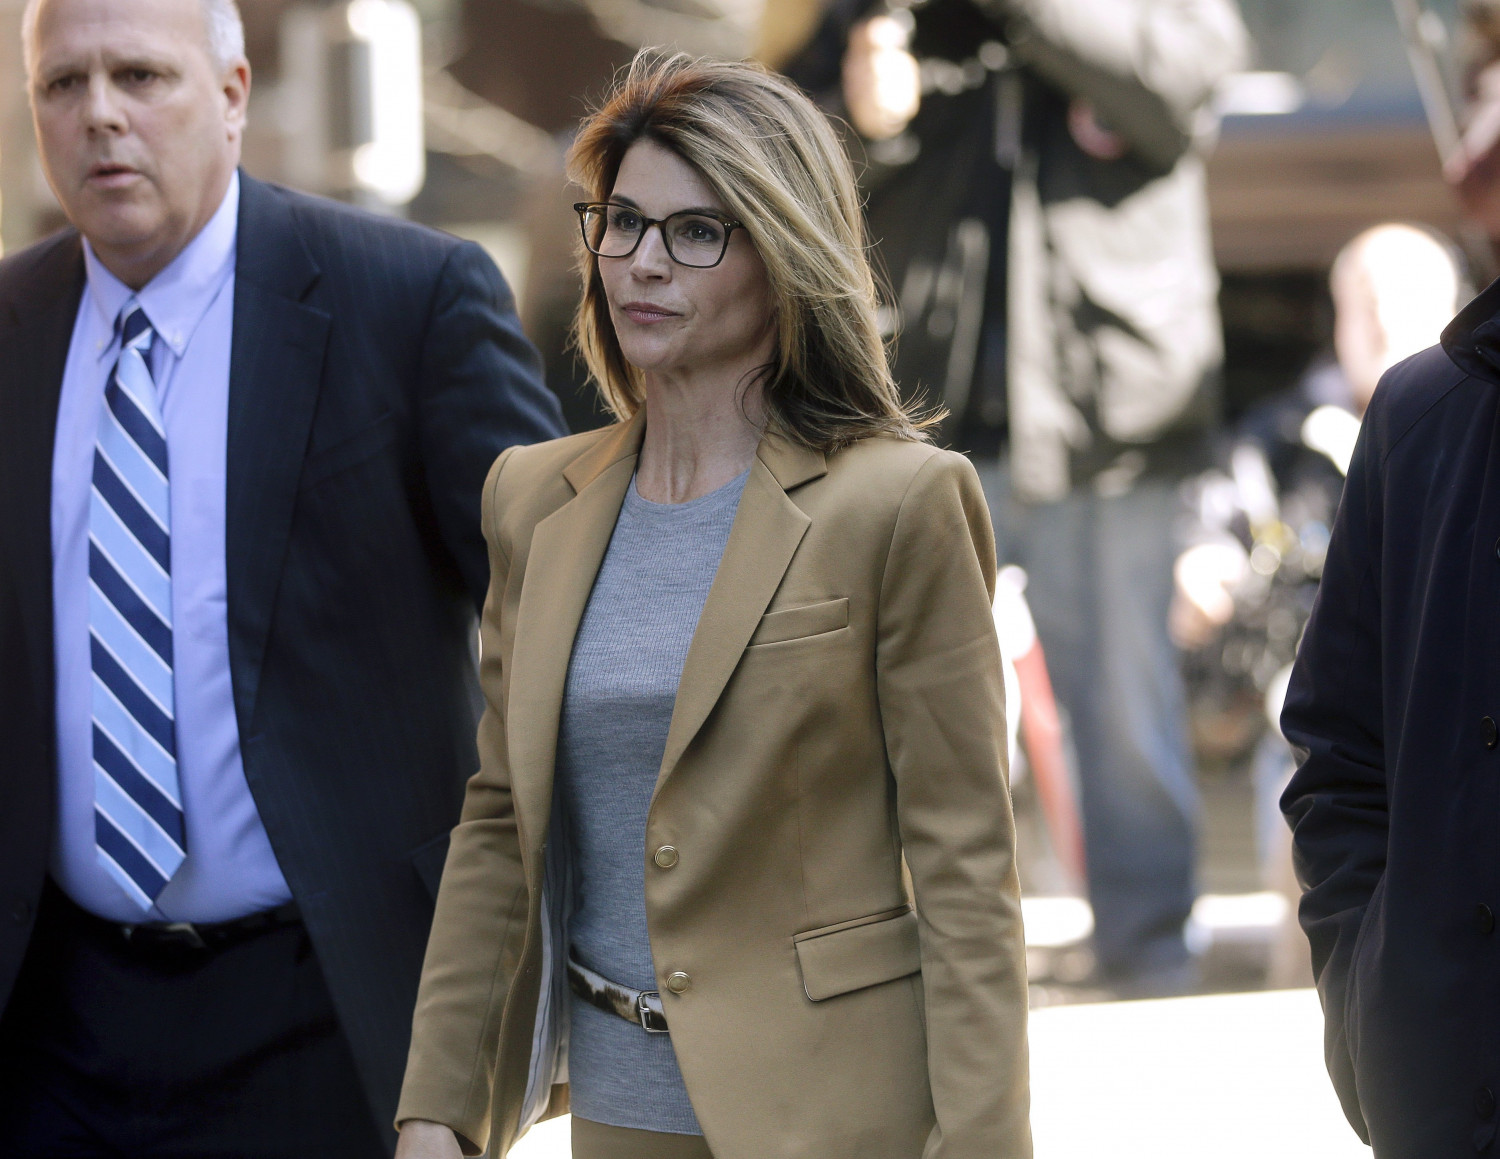 Lori Loughlin and Mossimo Giannulli Are ‘Not Ready’ to Make a Plea in College Admissions Scandal